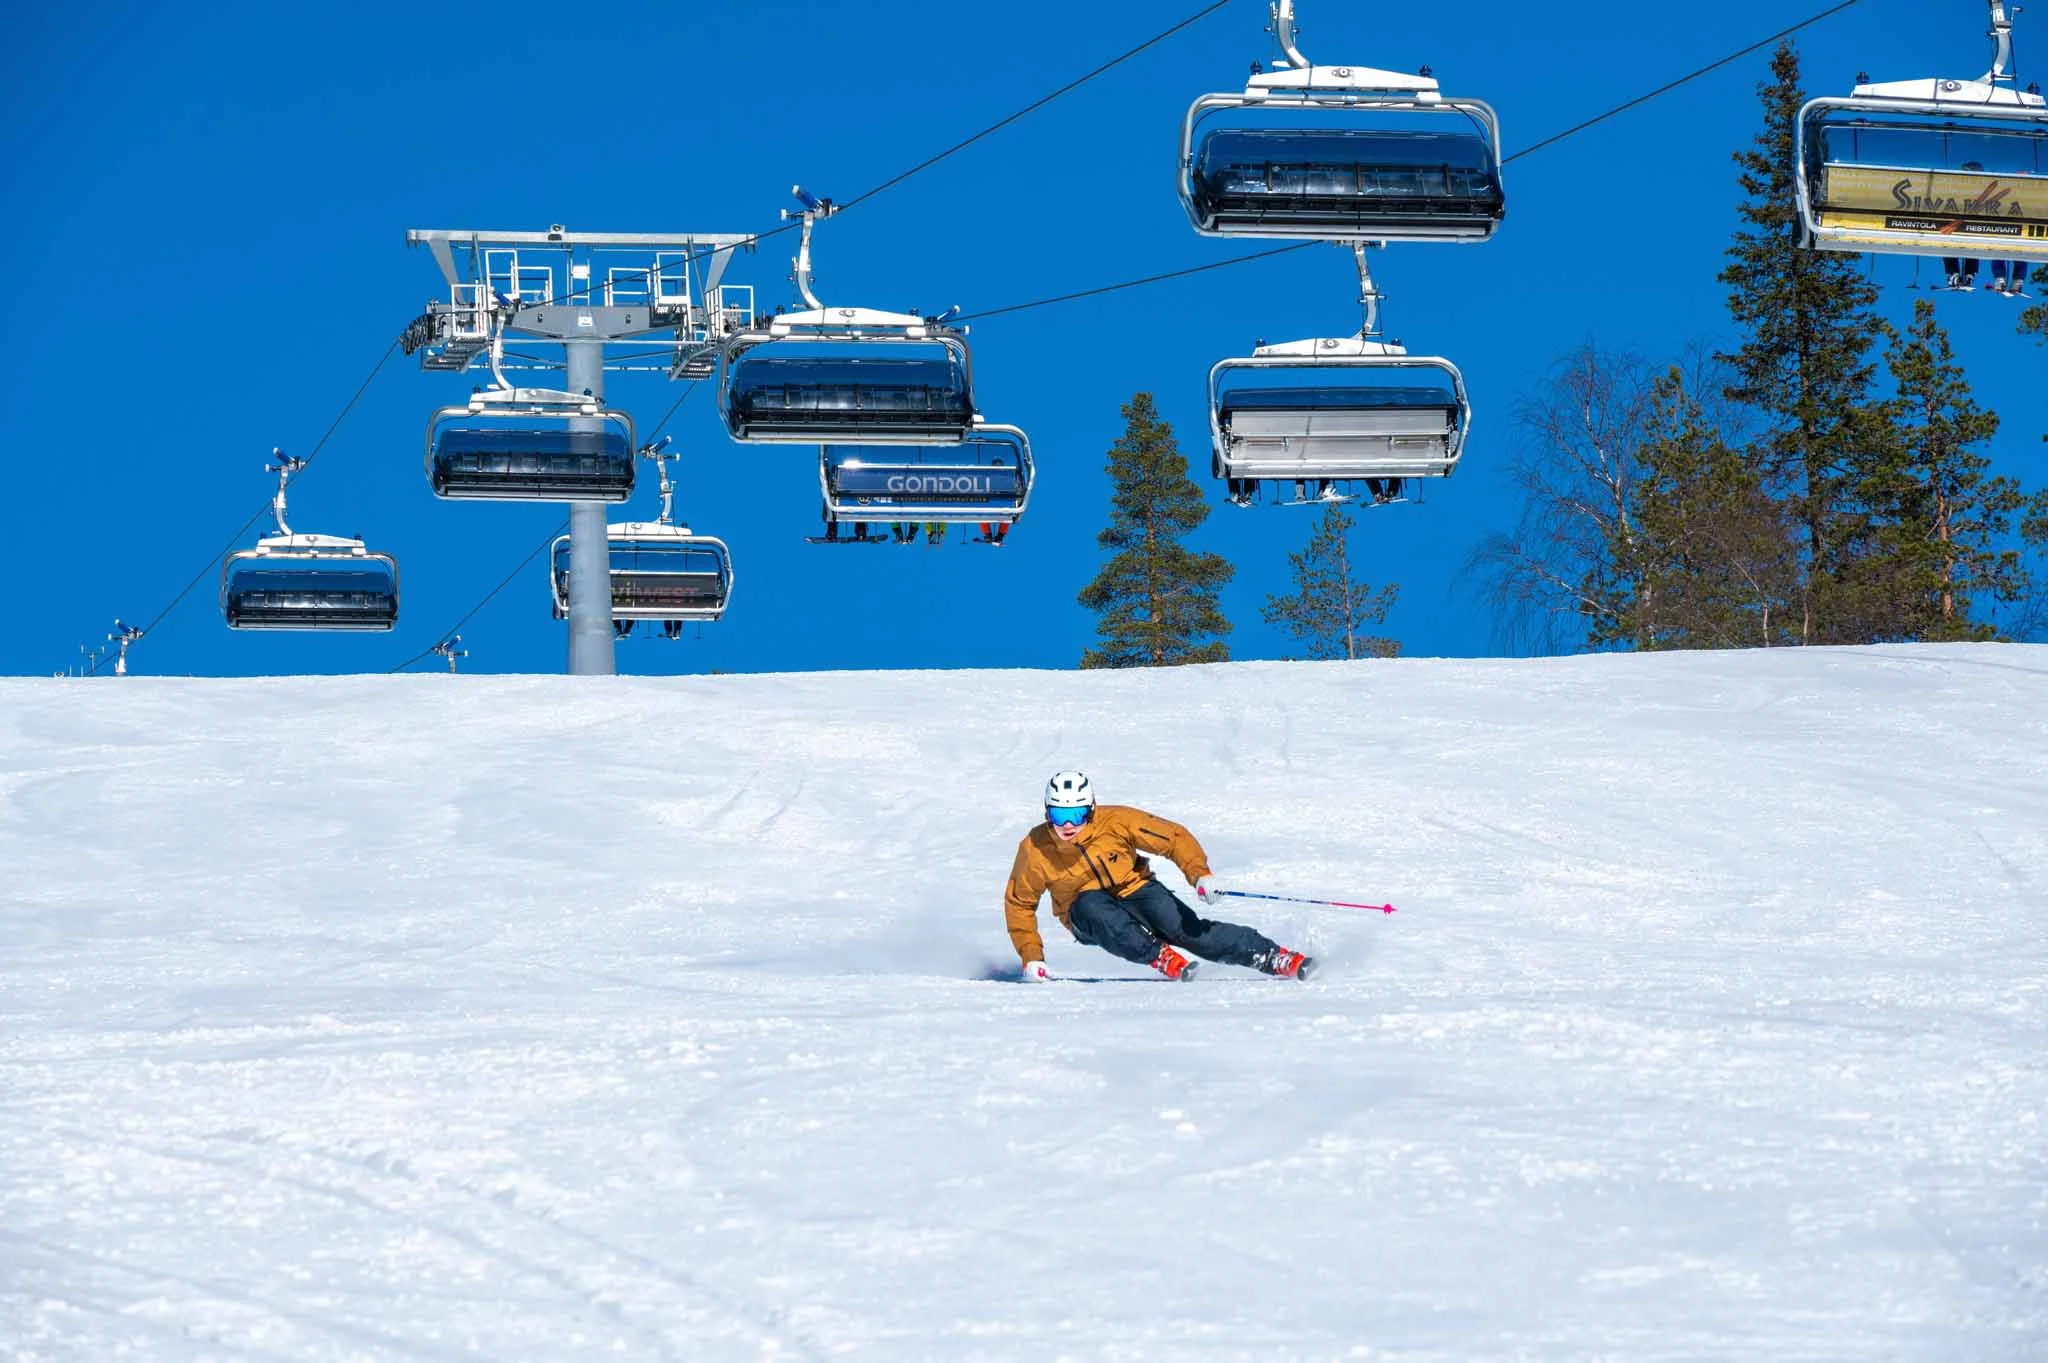 blue sky, empty chairlift with bubble overhead, empty piste, with one skier in orange carving deeply